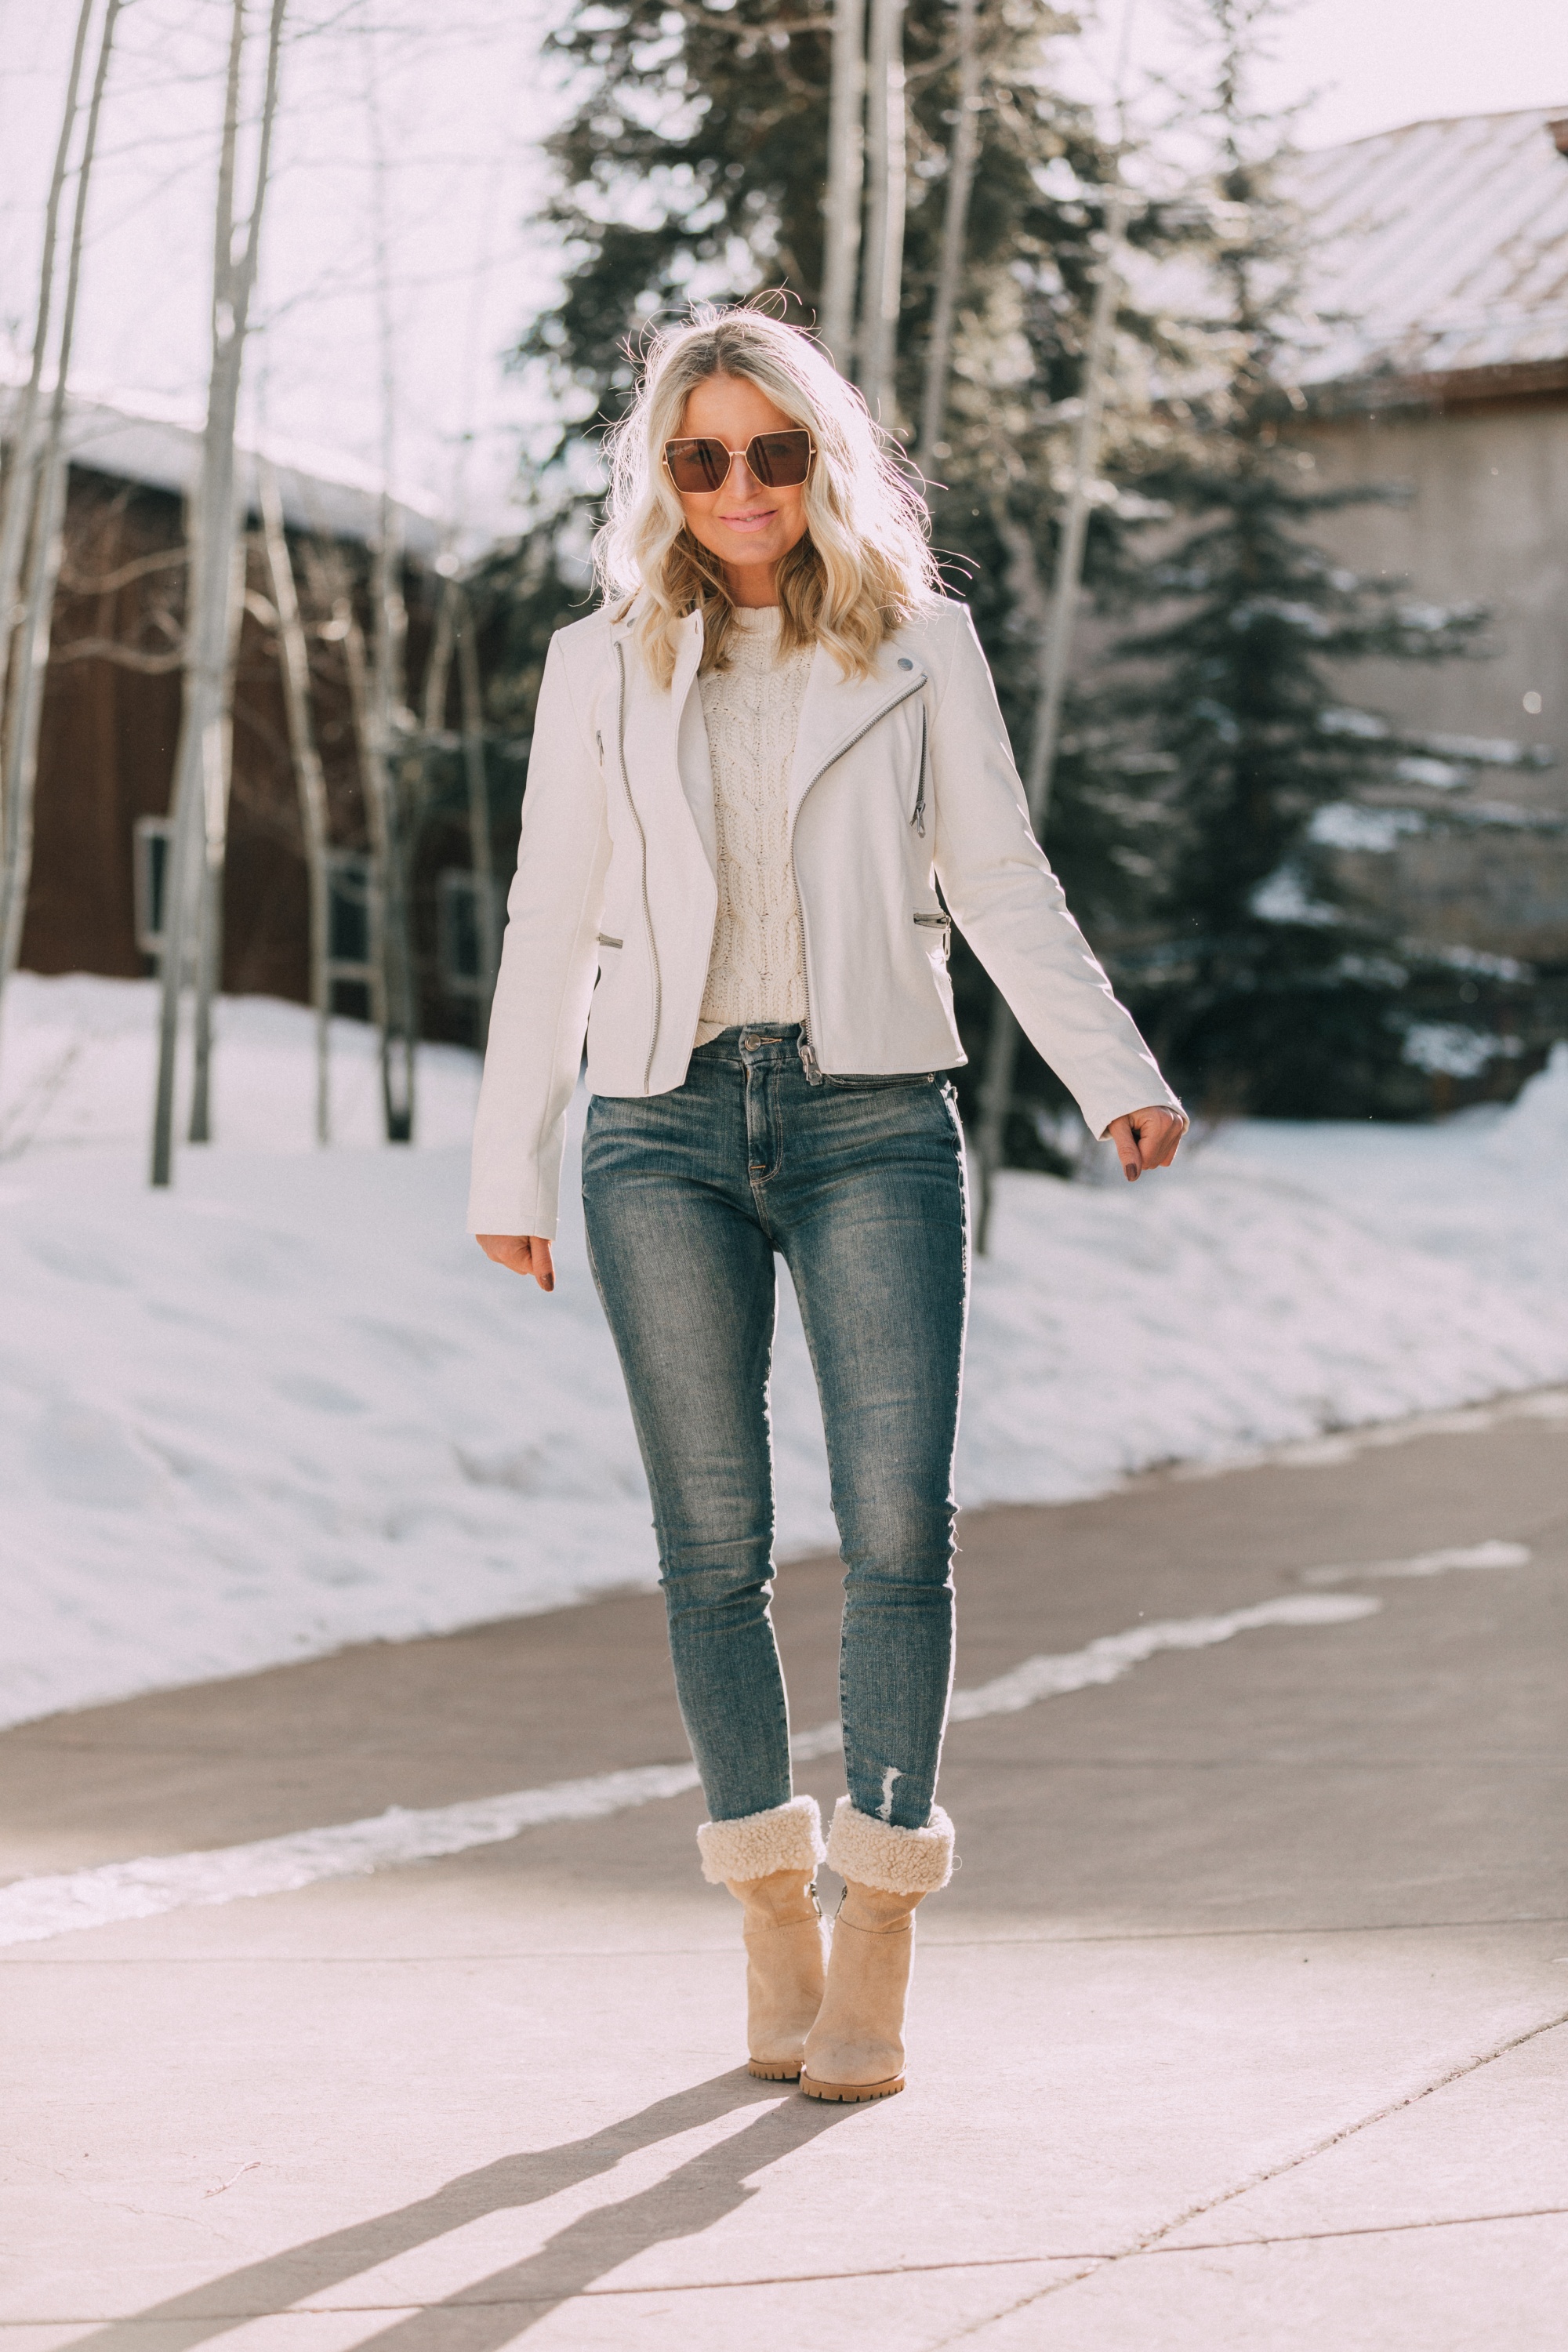 walmart scoop fashion blogger wearing white faux leather moto jacket, white cable knit sweater and medium wash skinny jeans and foldover shearling tan heeled womens booties in Telluride, Colorado